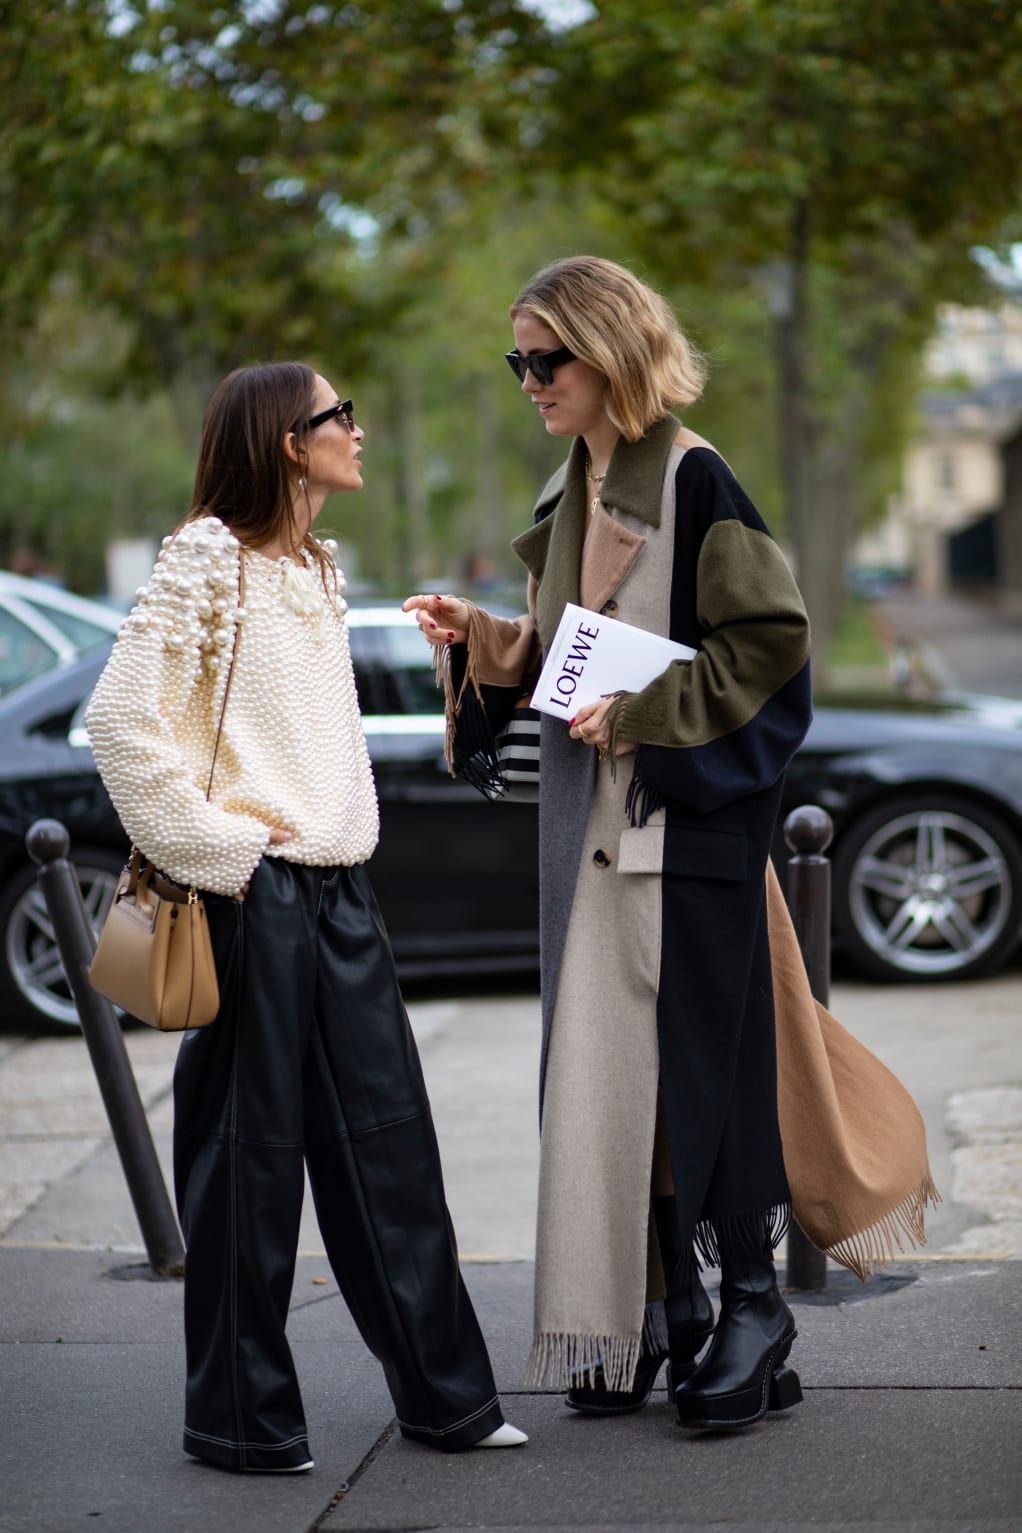 The Best Street Style Looks From Paris Fashion Week Spring 2020 - The Best Street Style Looks From Paris Fashion Week Spring 2020 -   8 style Vestimentaire urbain ideas